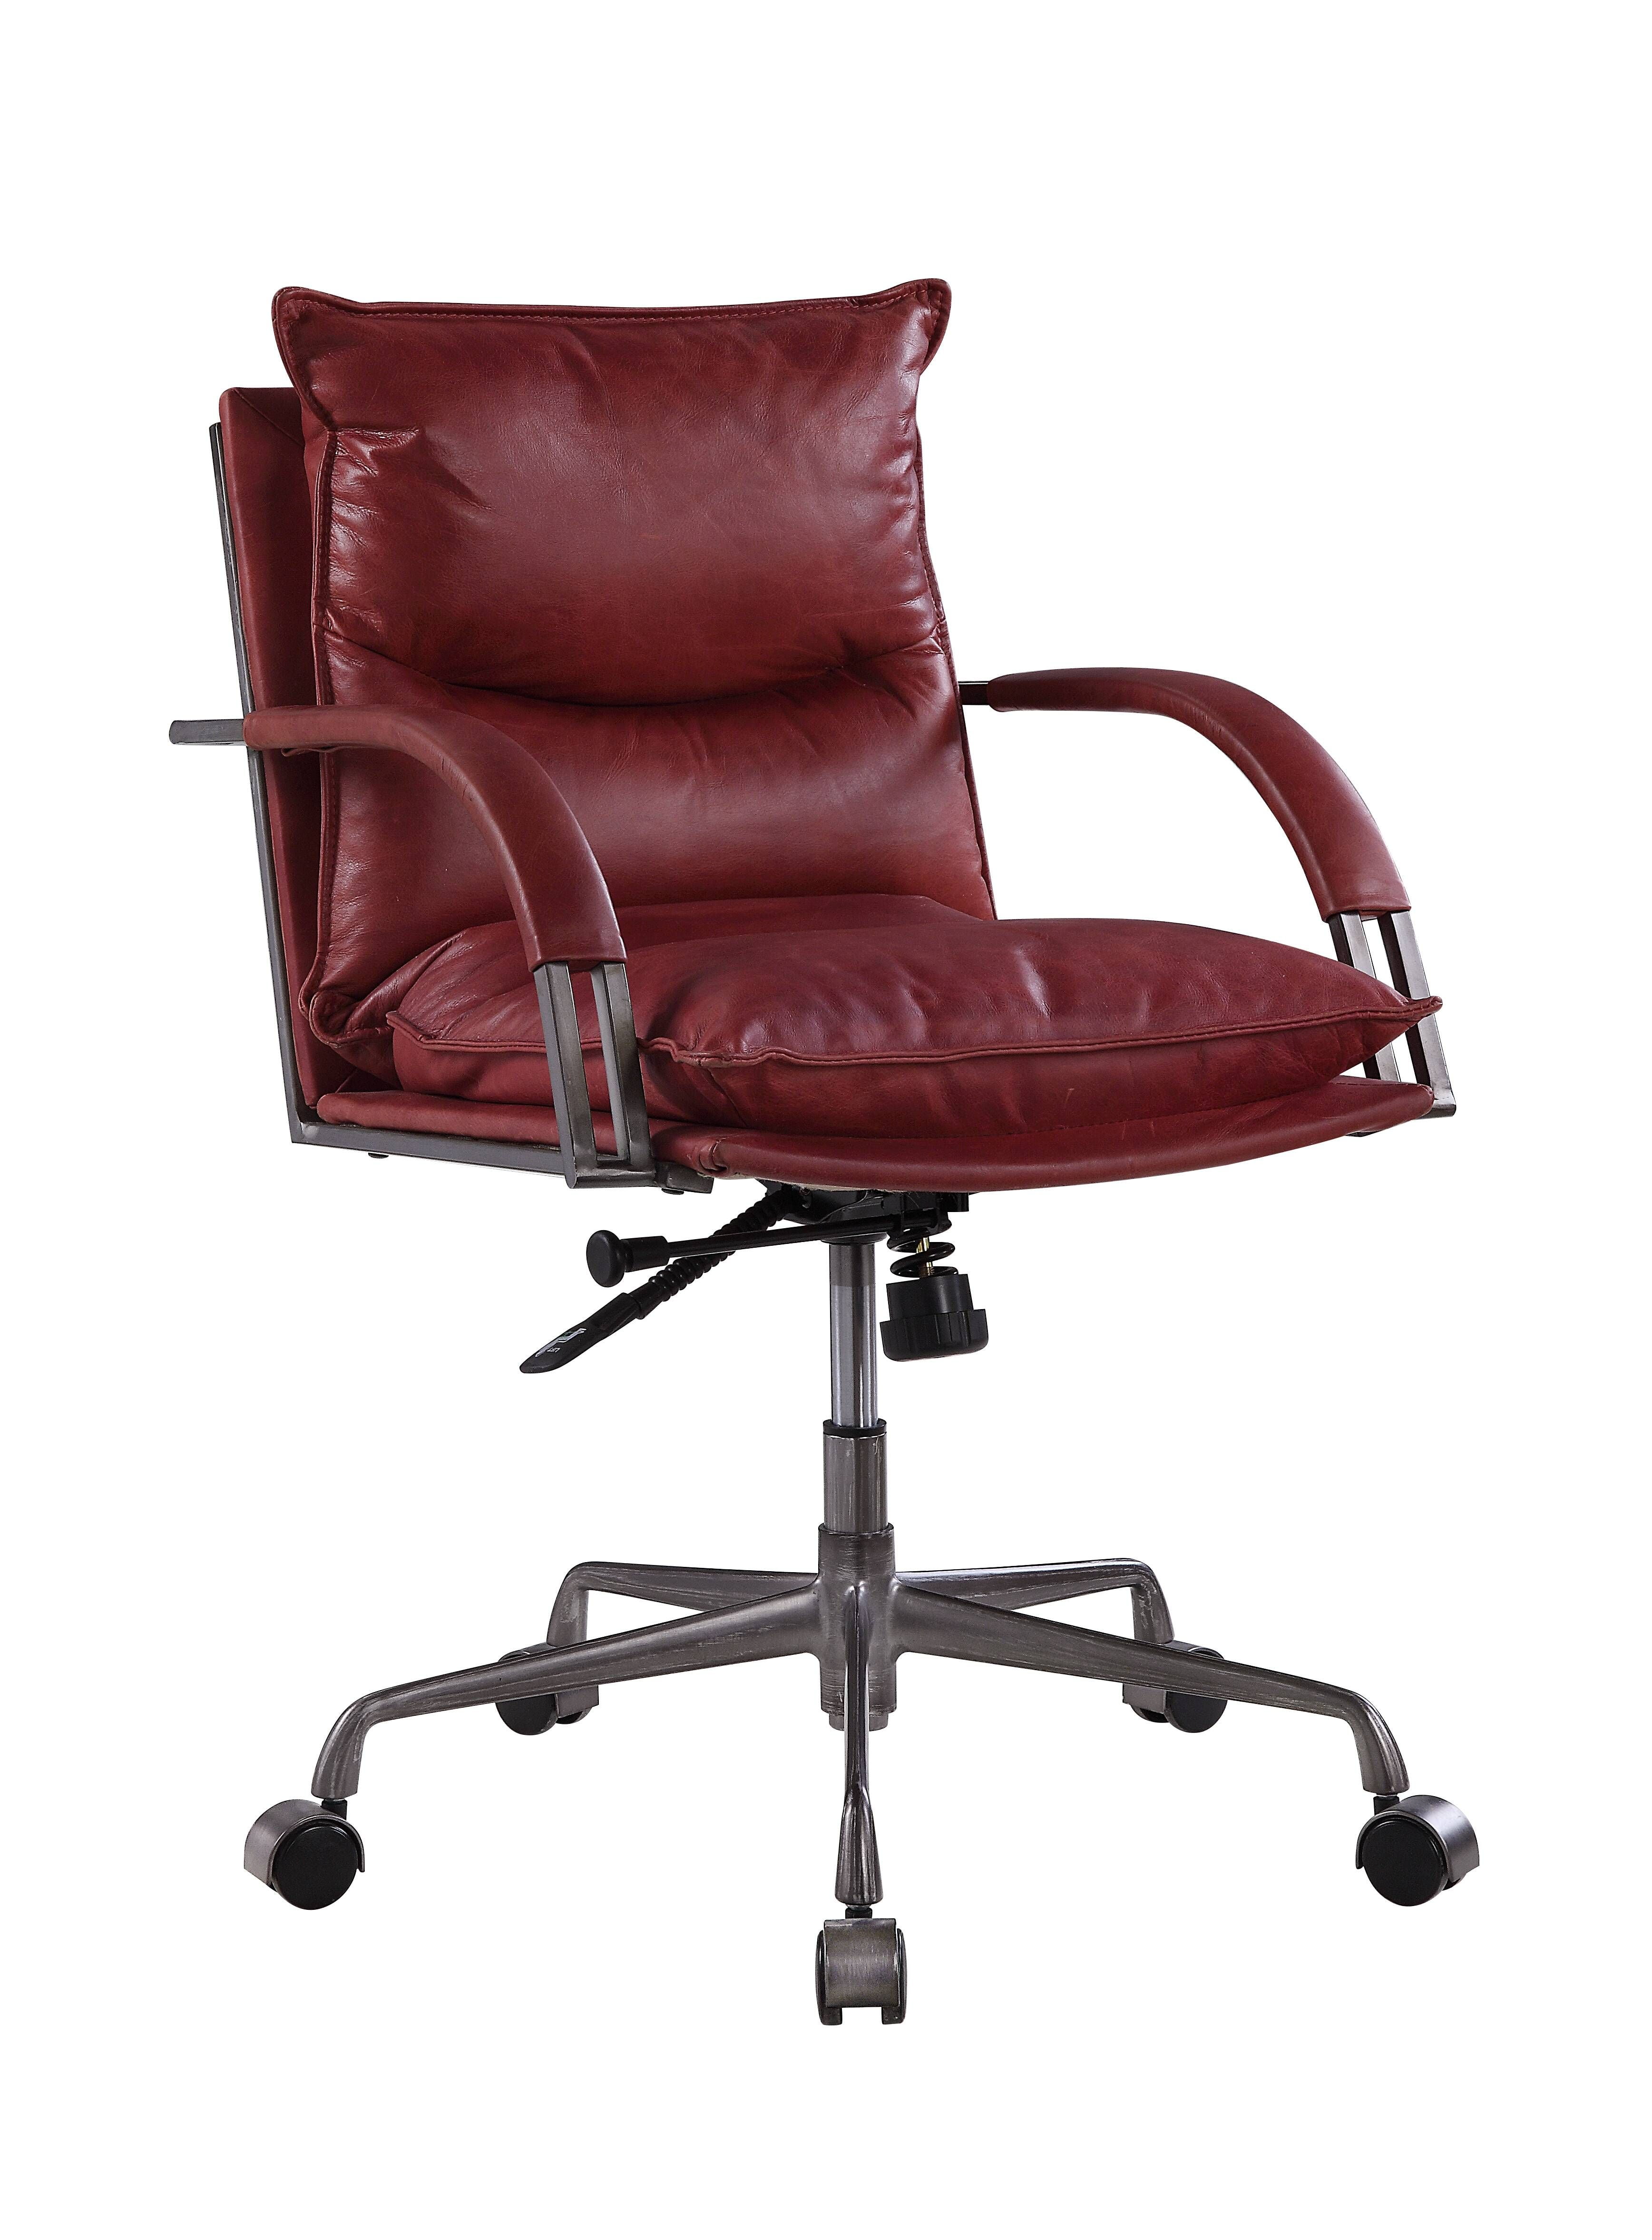 Haggar Executive Office Chair In, Red Leather Computer Chair